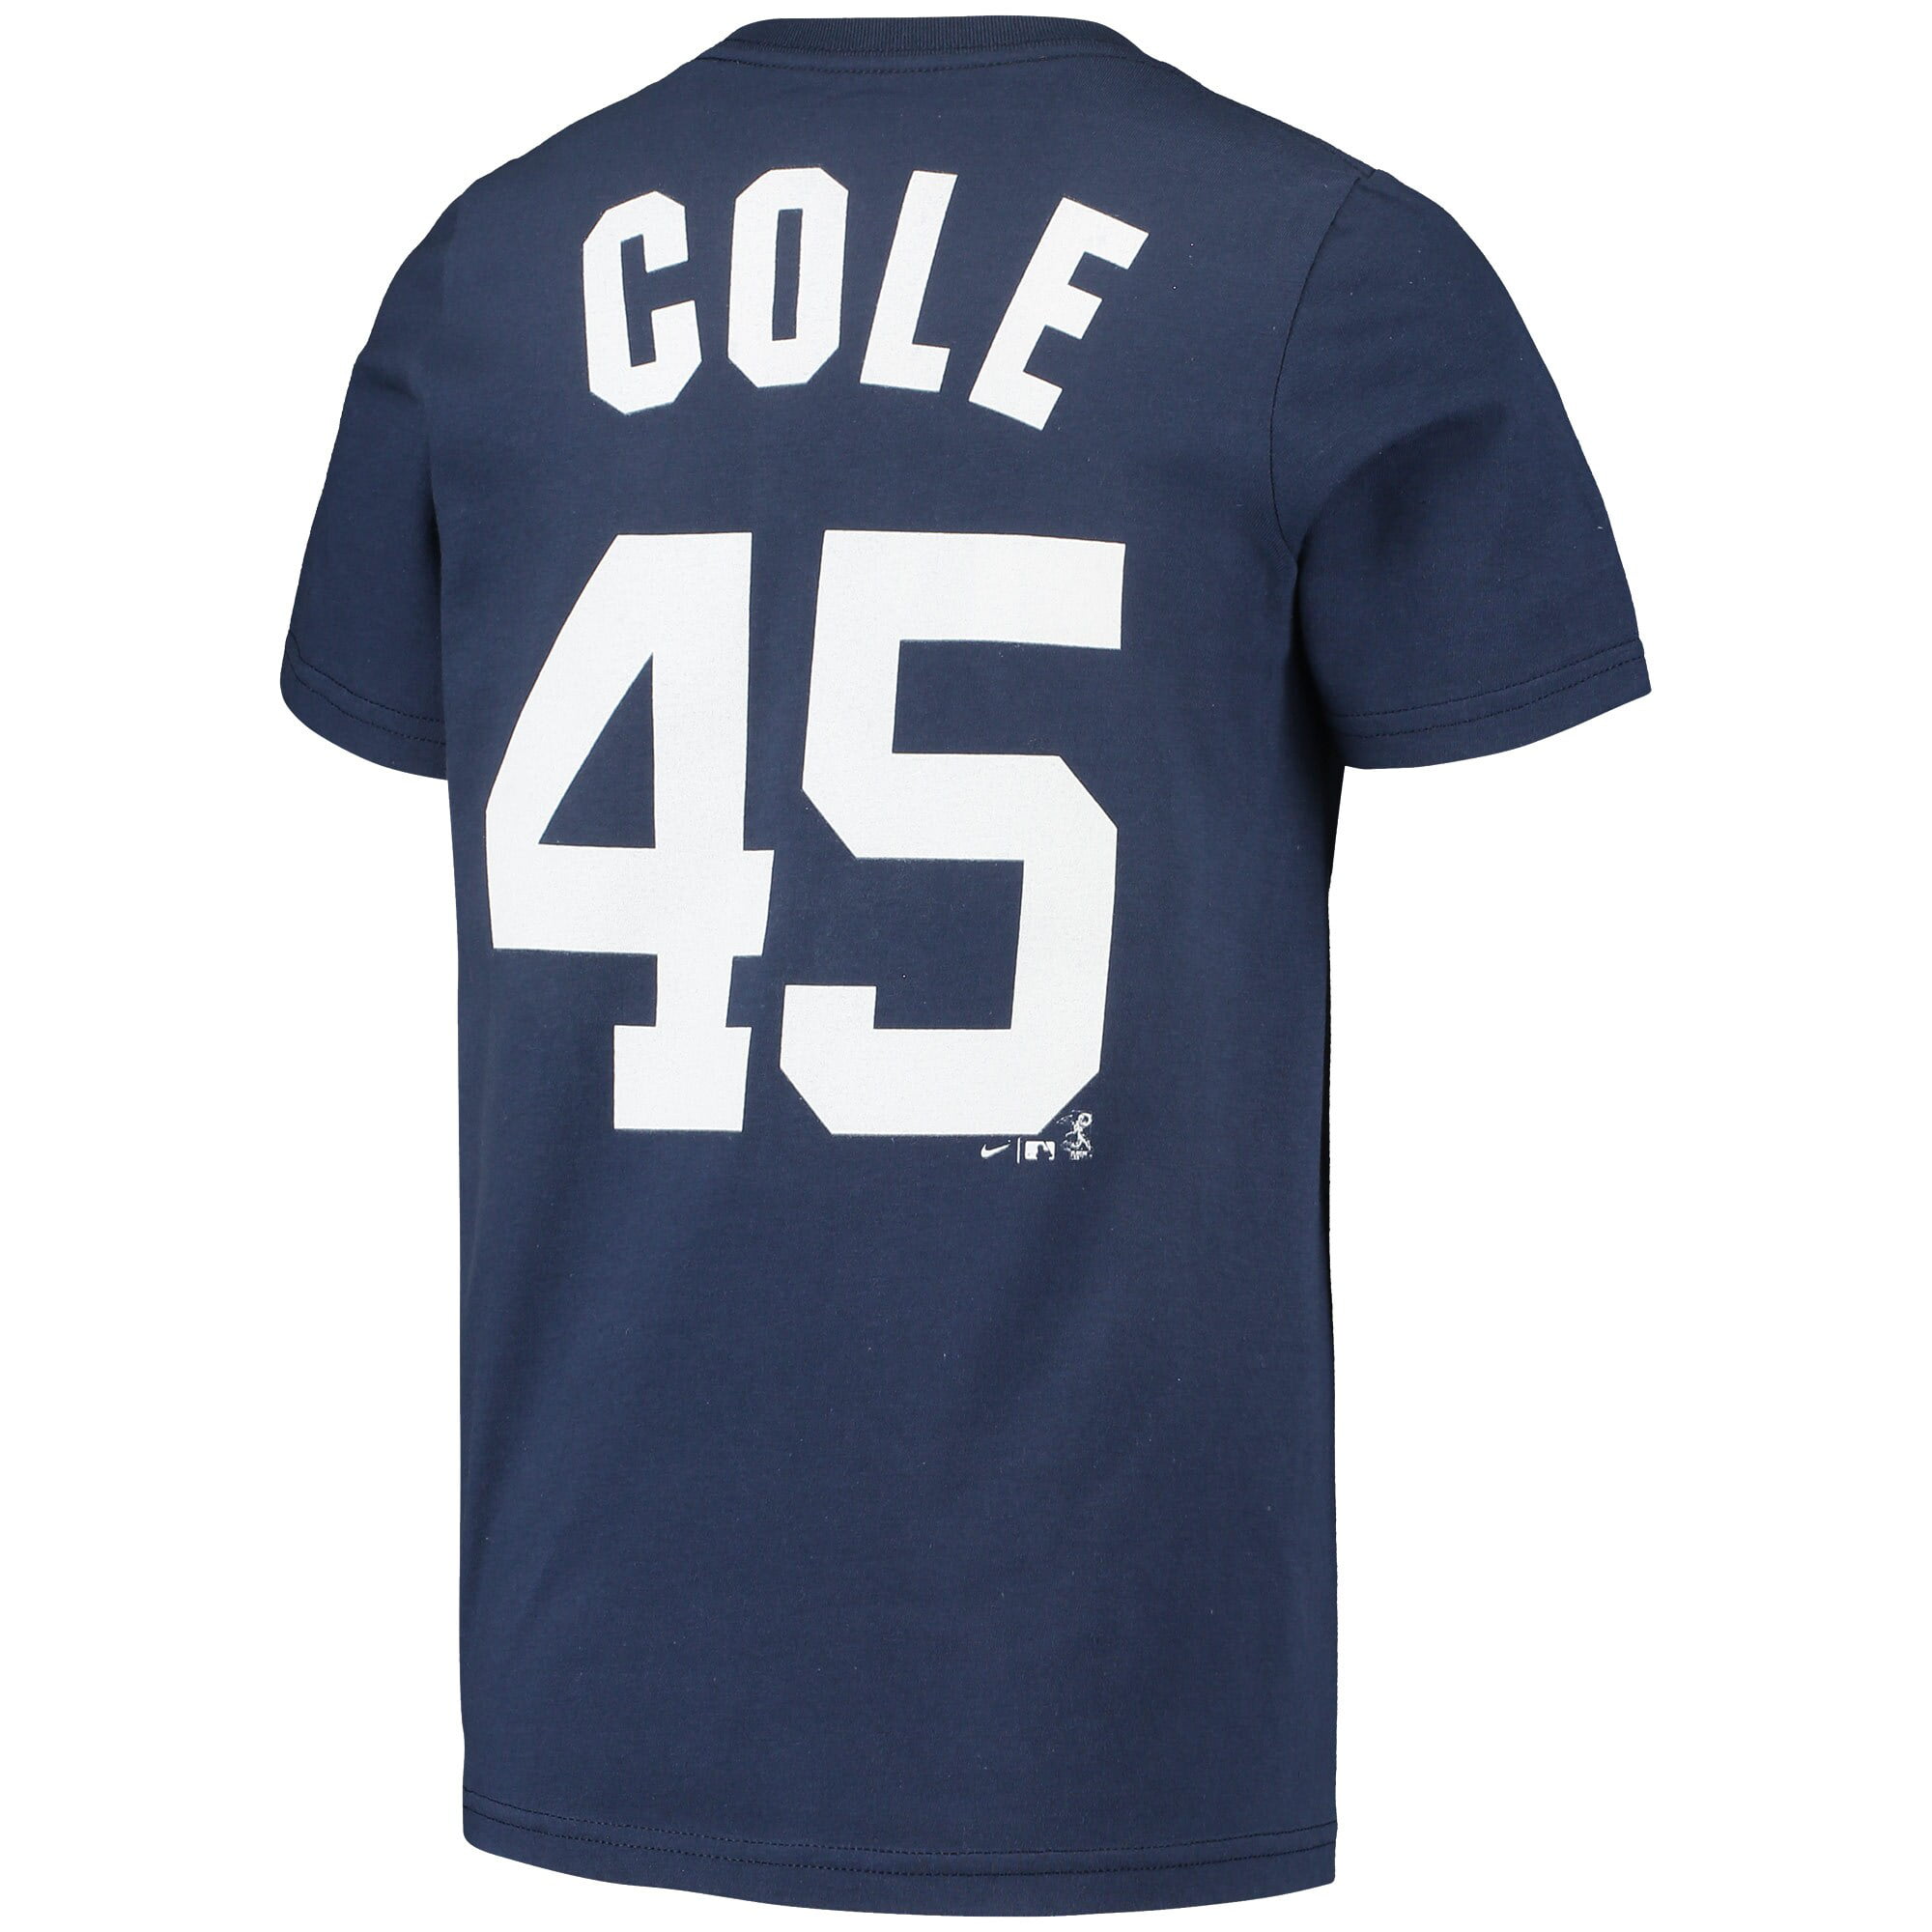 Gerrit Cole Yankees Nike Jerseys, Shirts and Souvenirs